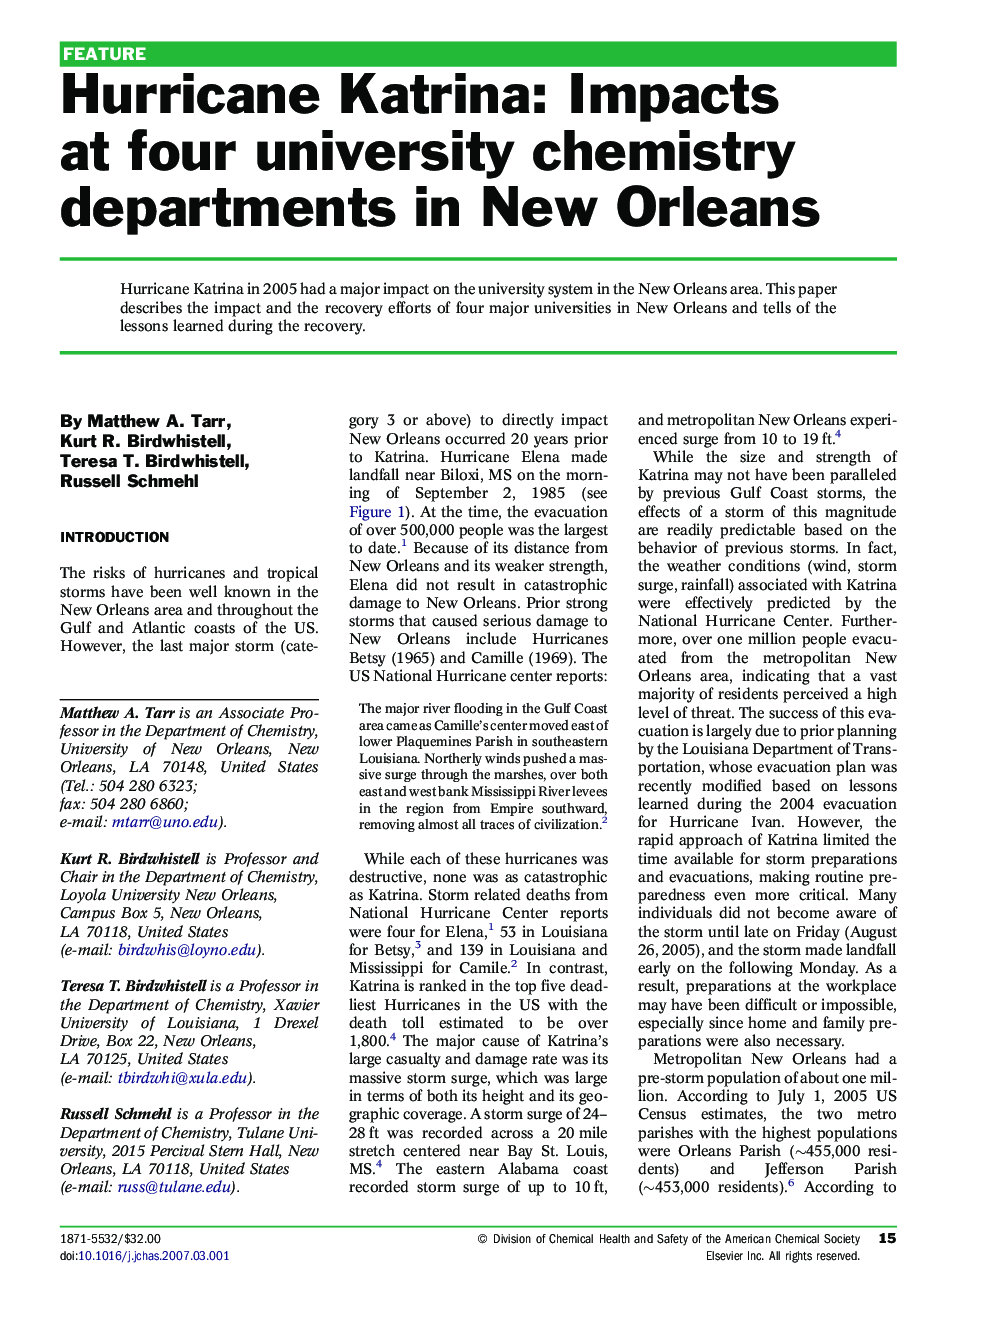 Hurricane Katrina: Impacts at four university chemistry departments in New Orleans